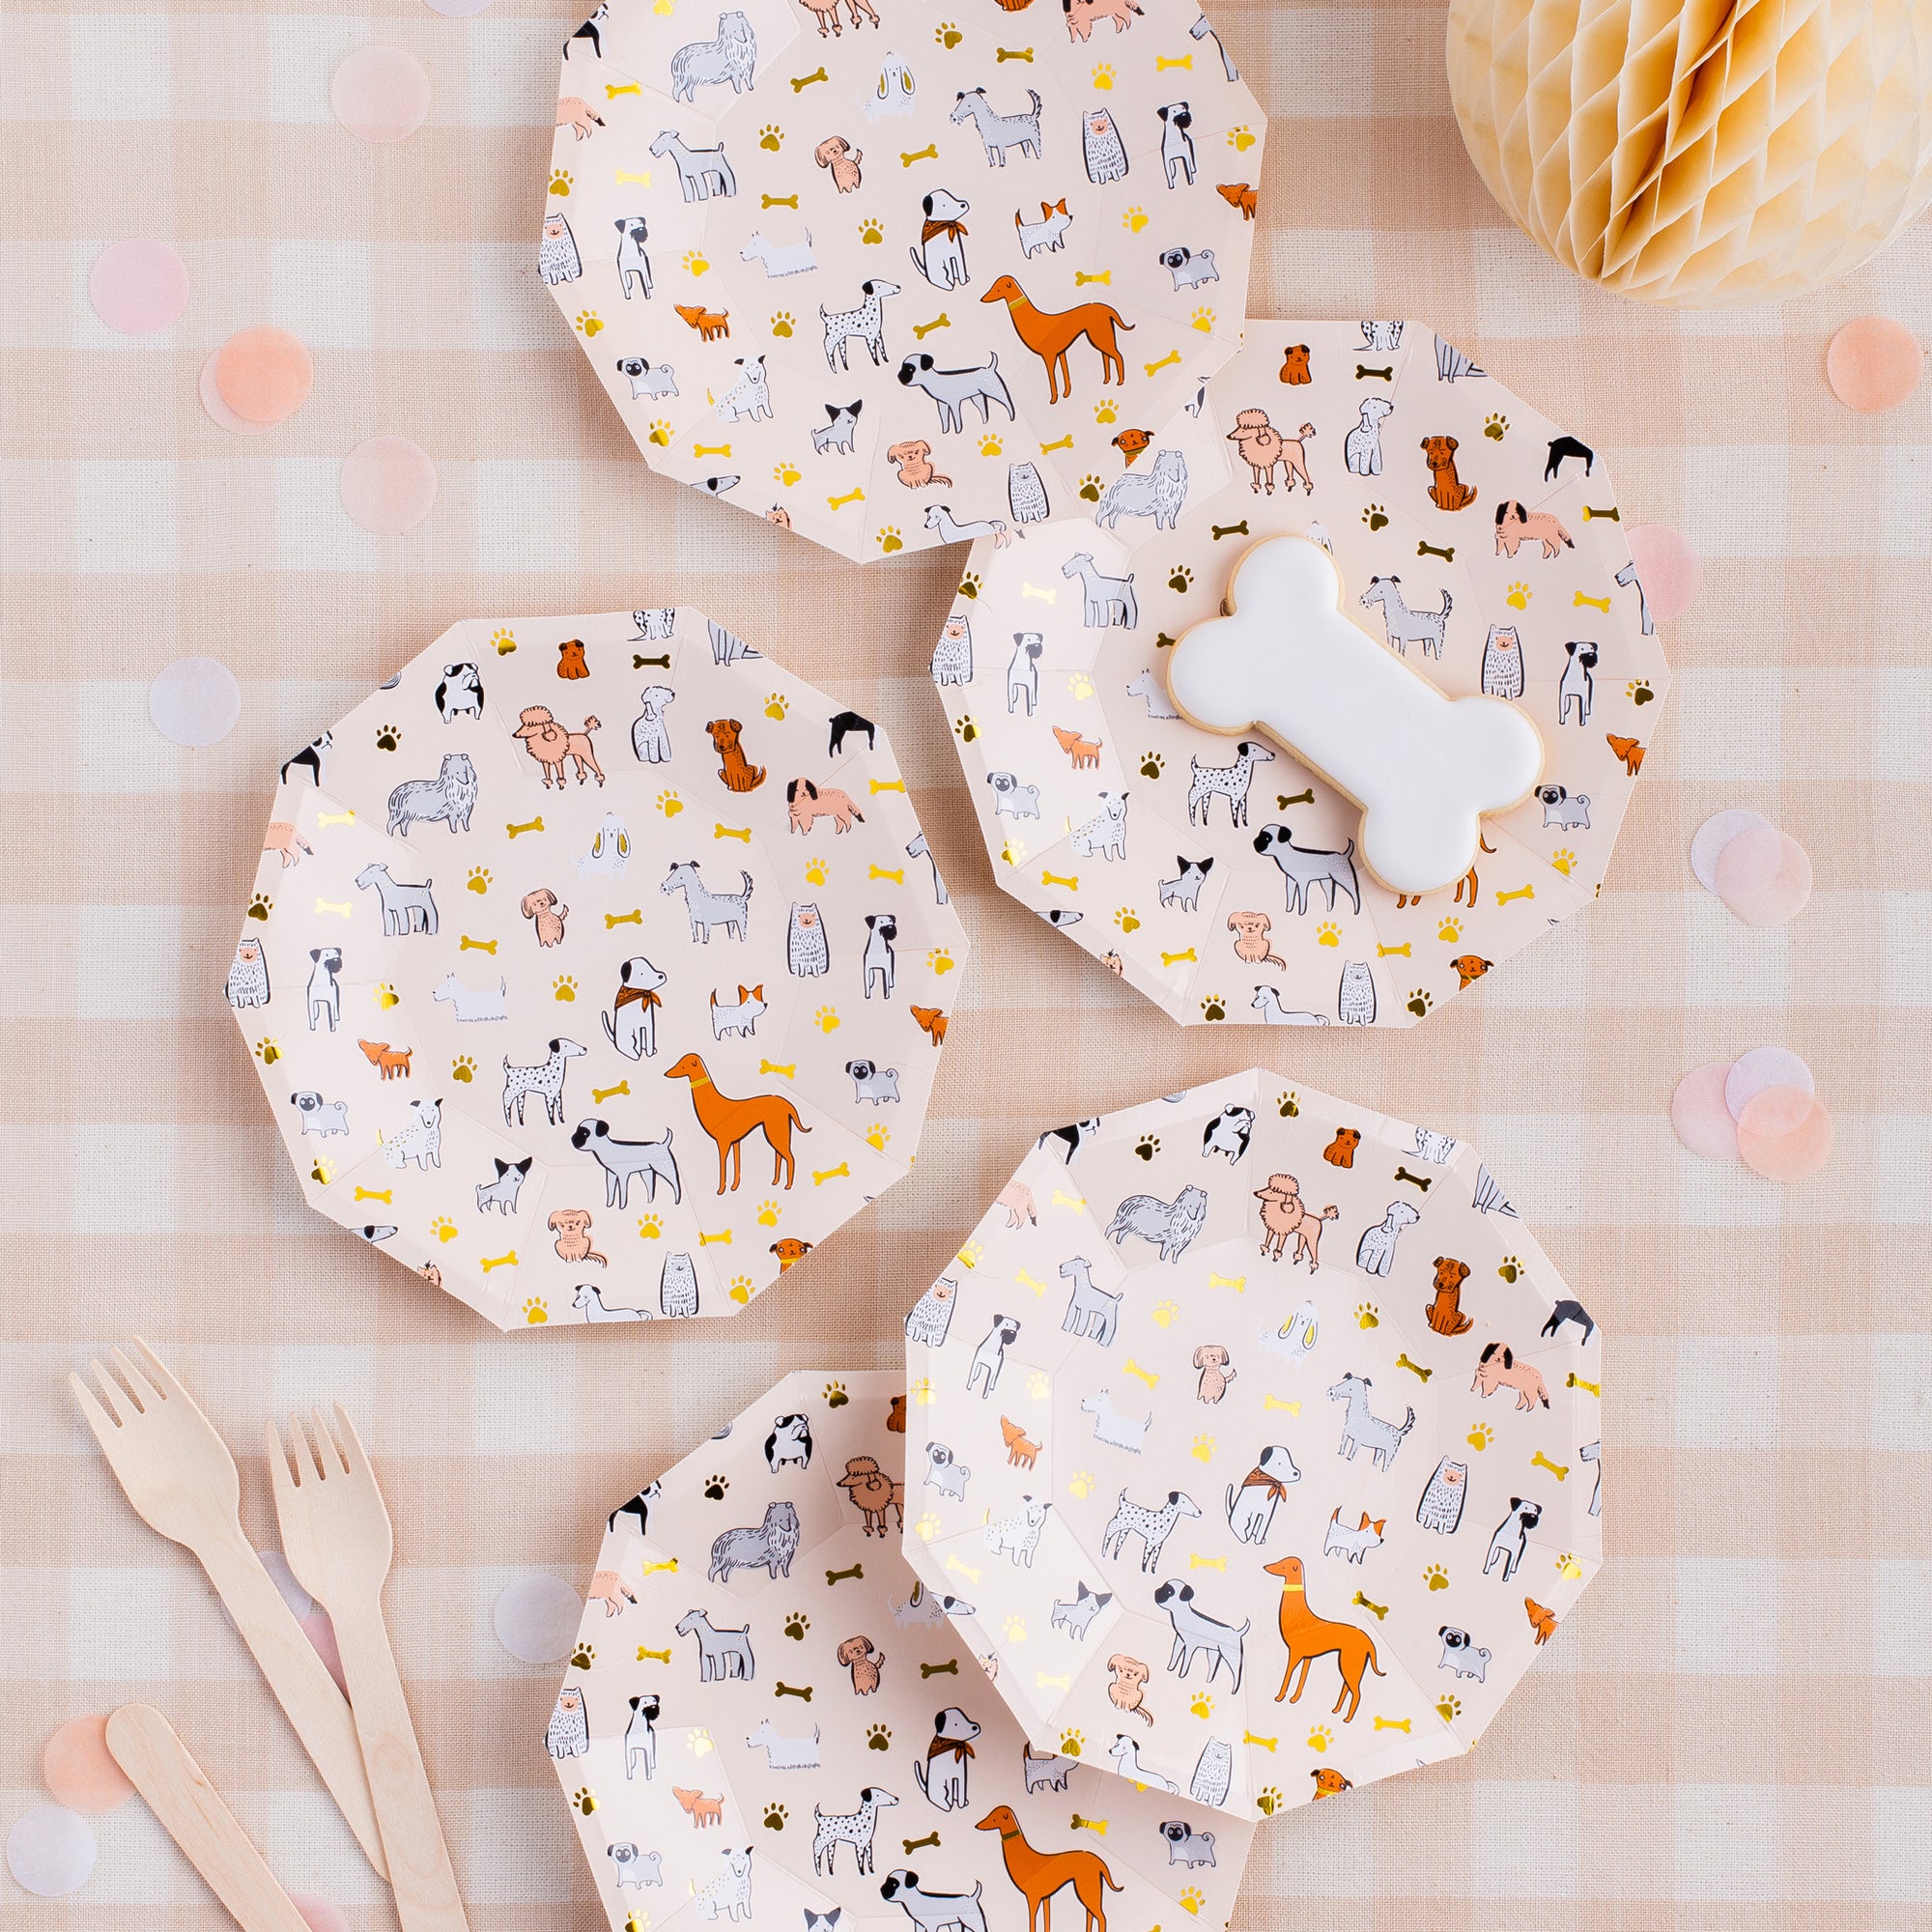 Bow Wow Dog Dessert Plates 8ct | The Party Darling